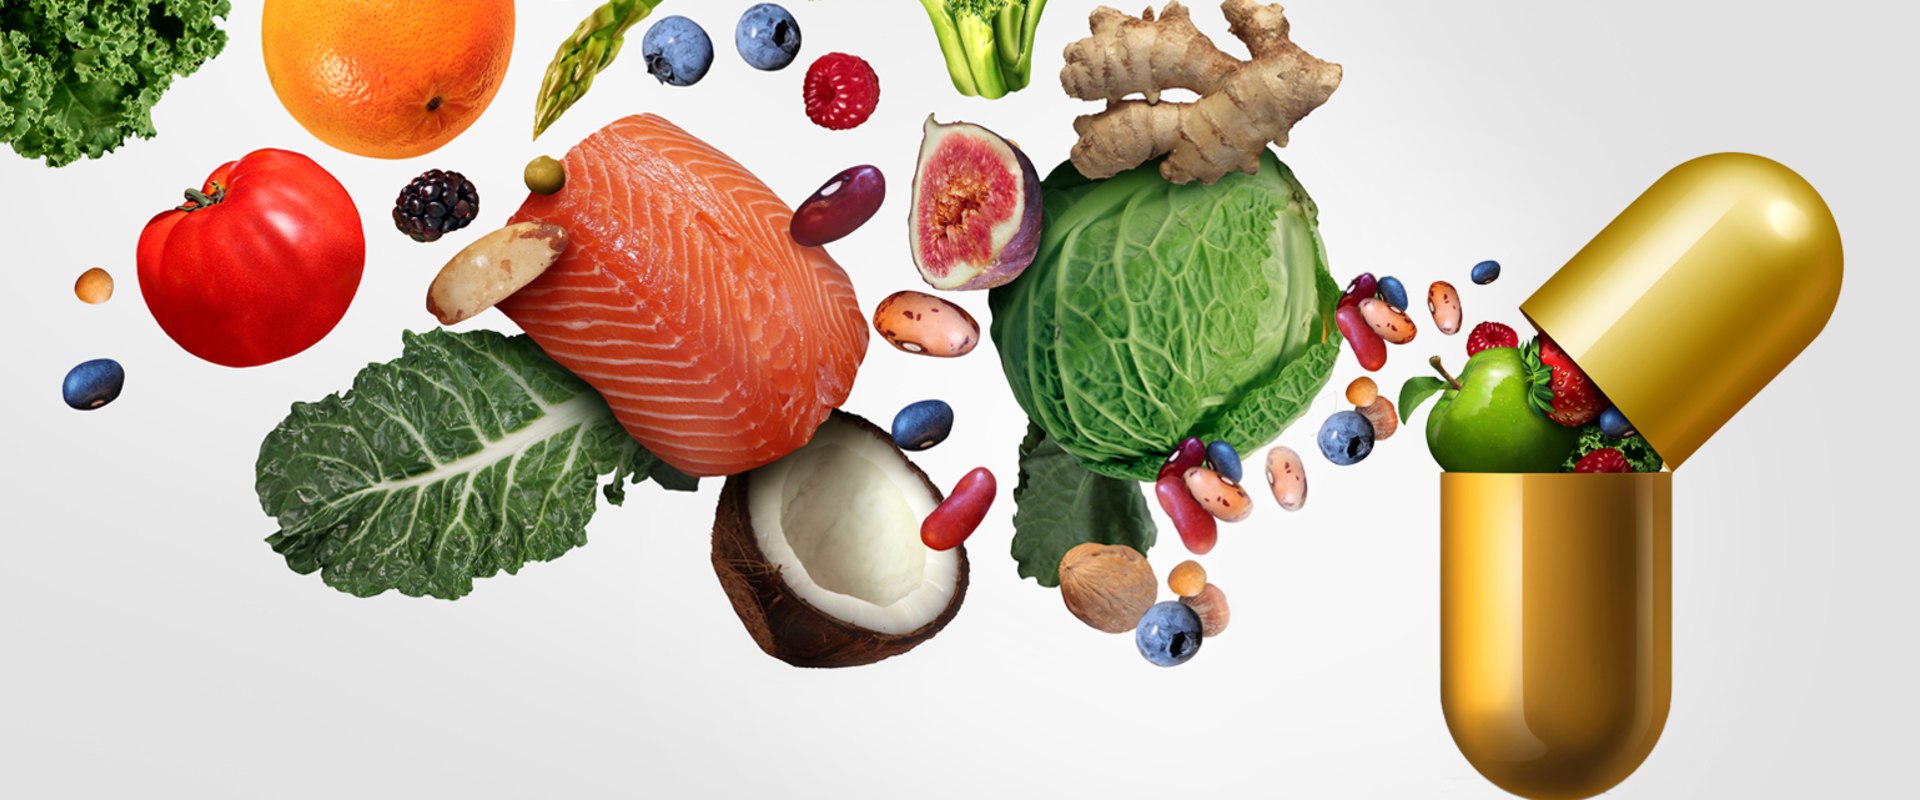 What is a natural dietary supplement?